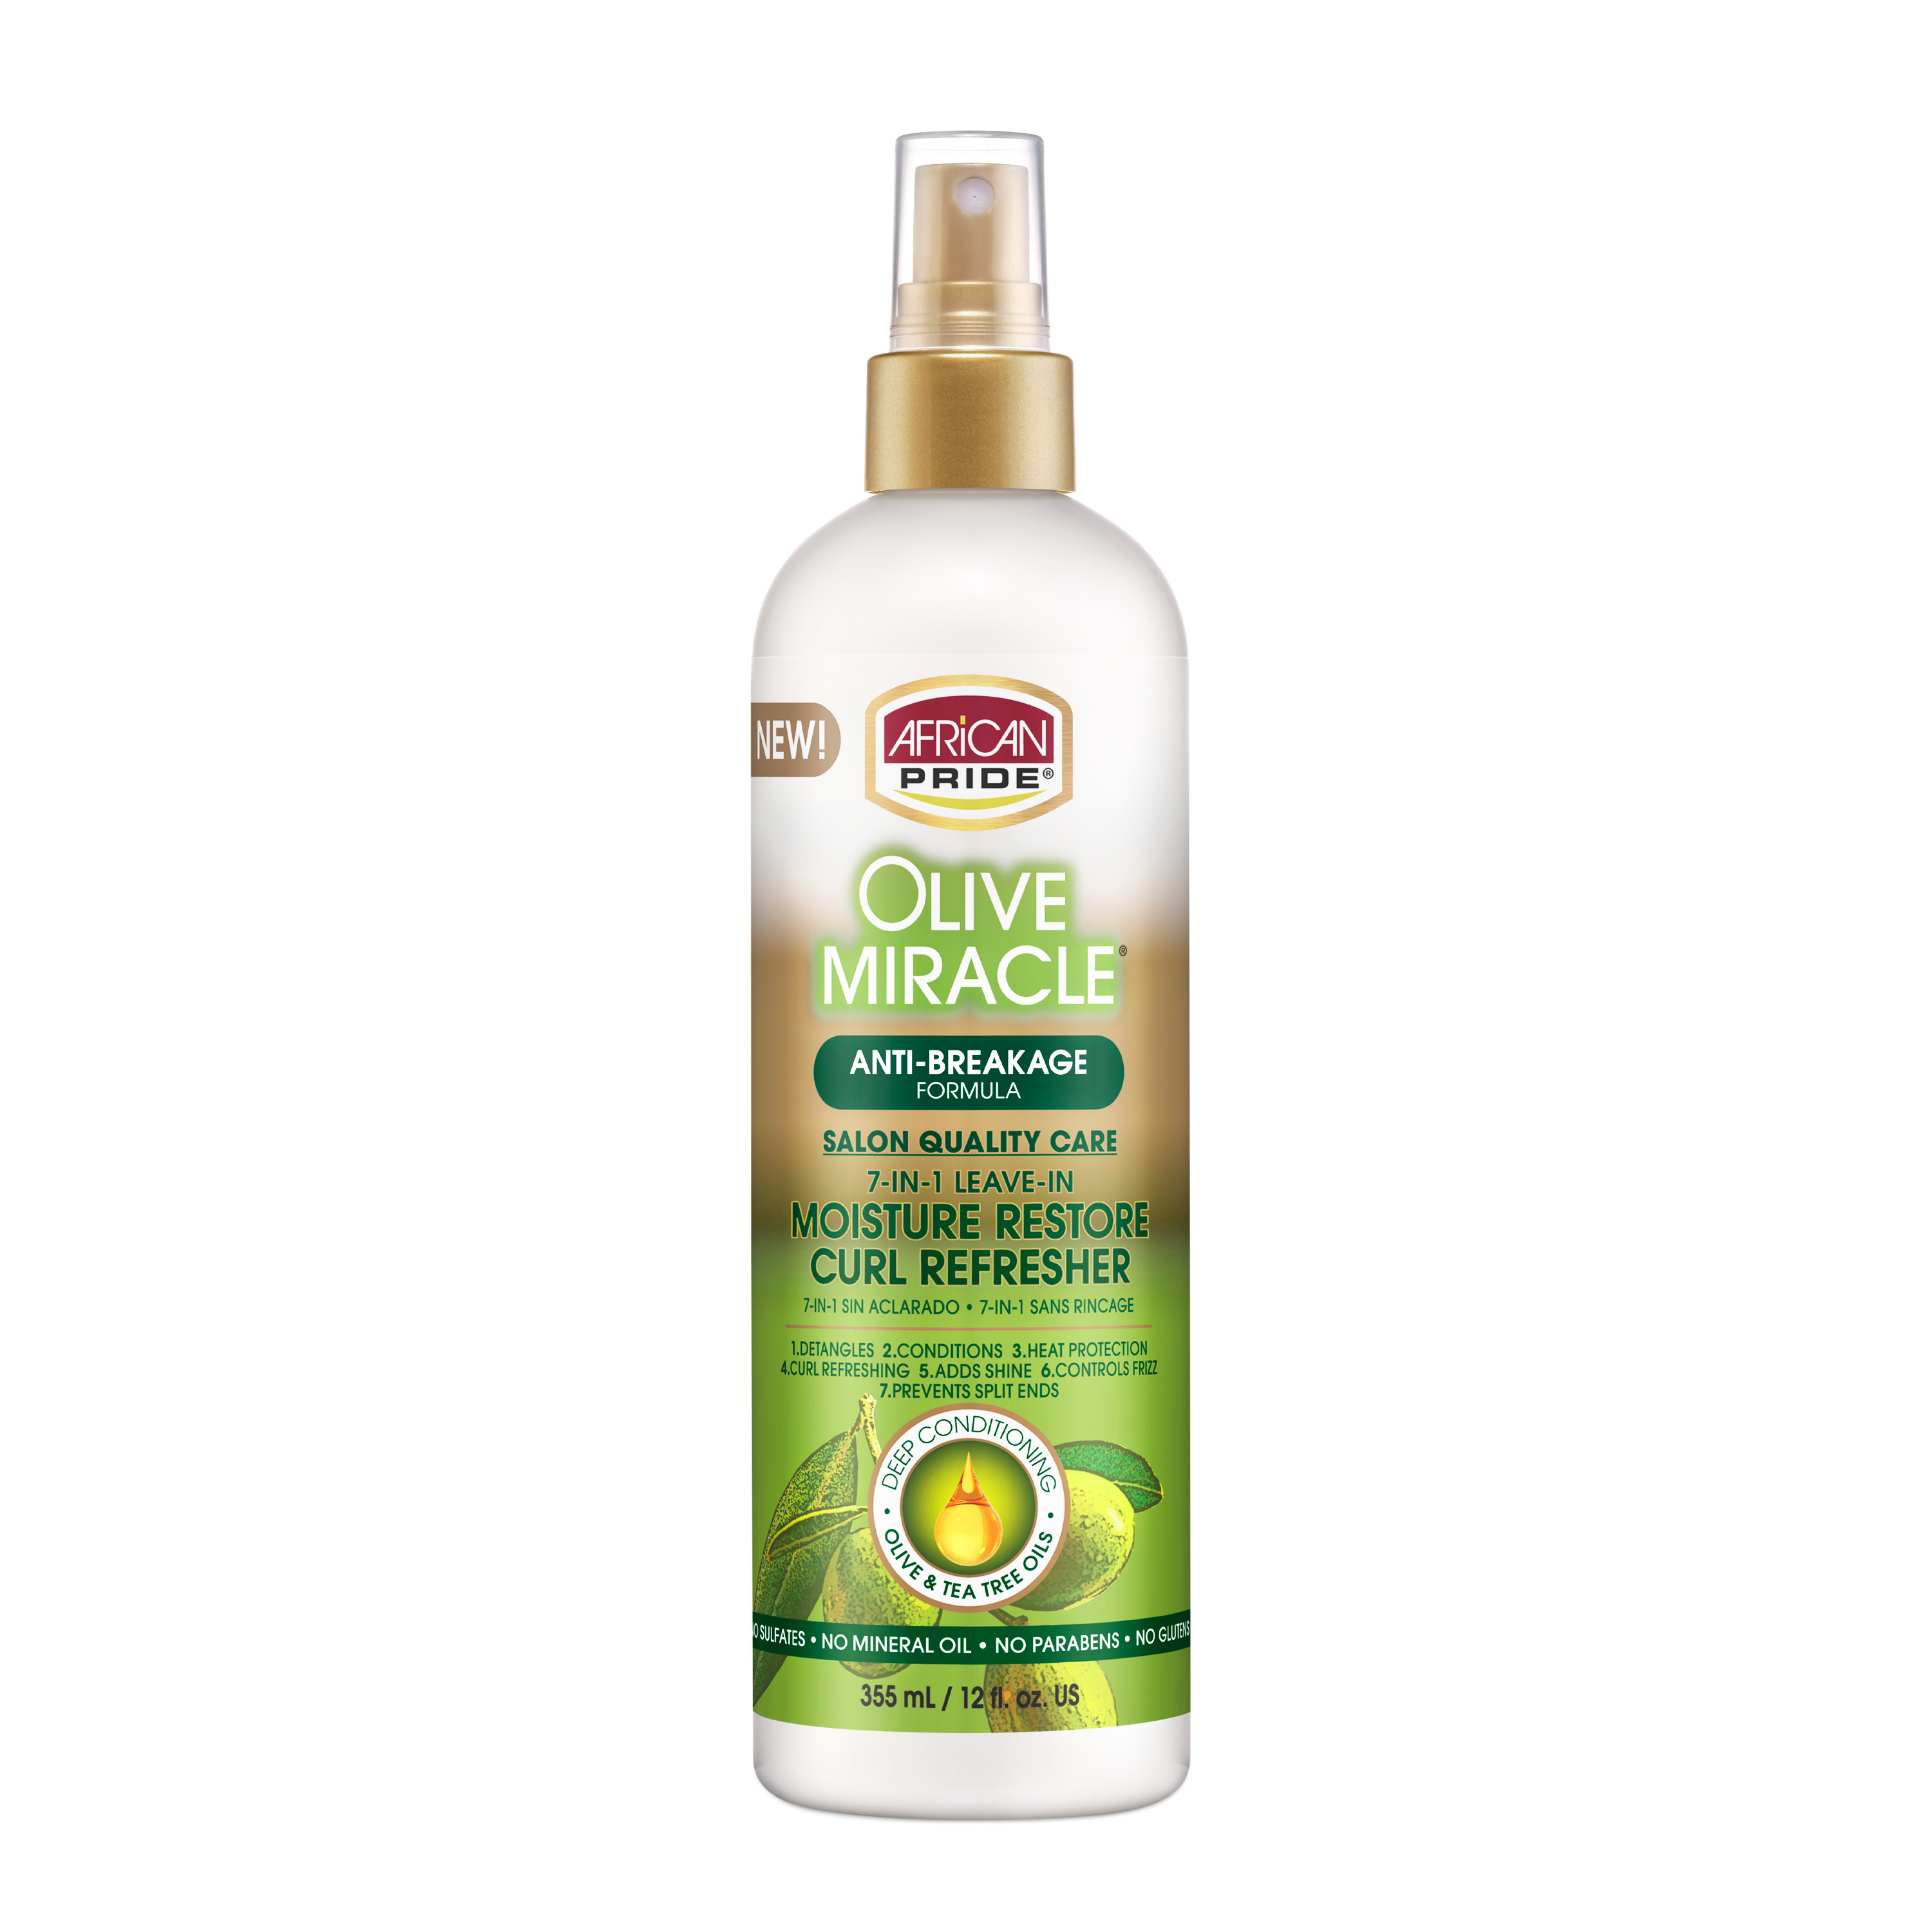 African Pride Olive Miracle Moisture Refresher Spray 12 oz., for Women, Moisturizing - image 1 of 6